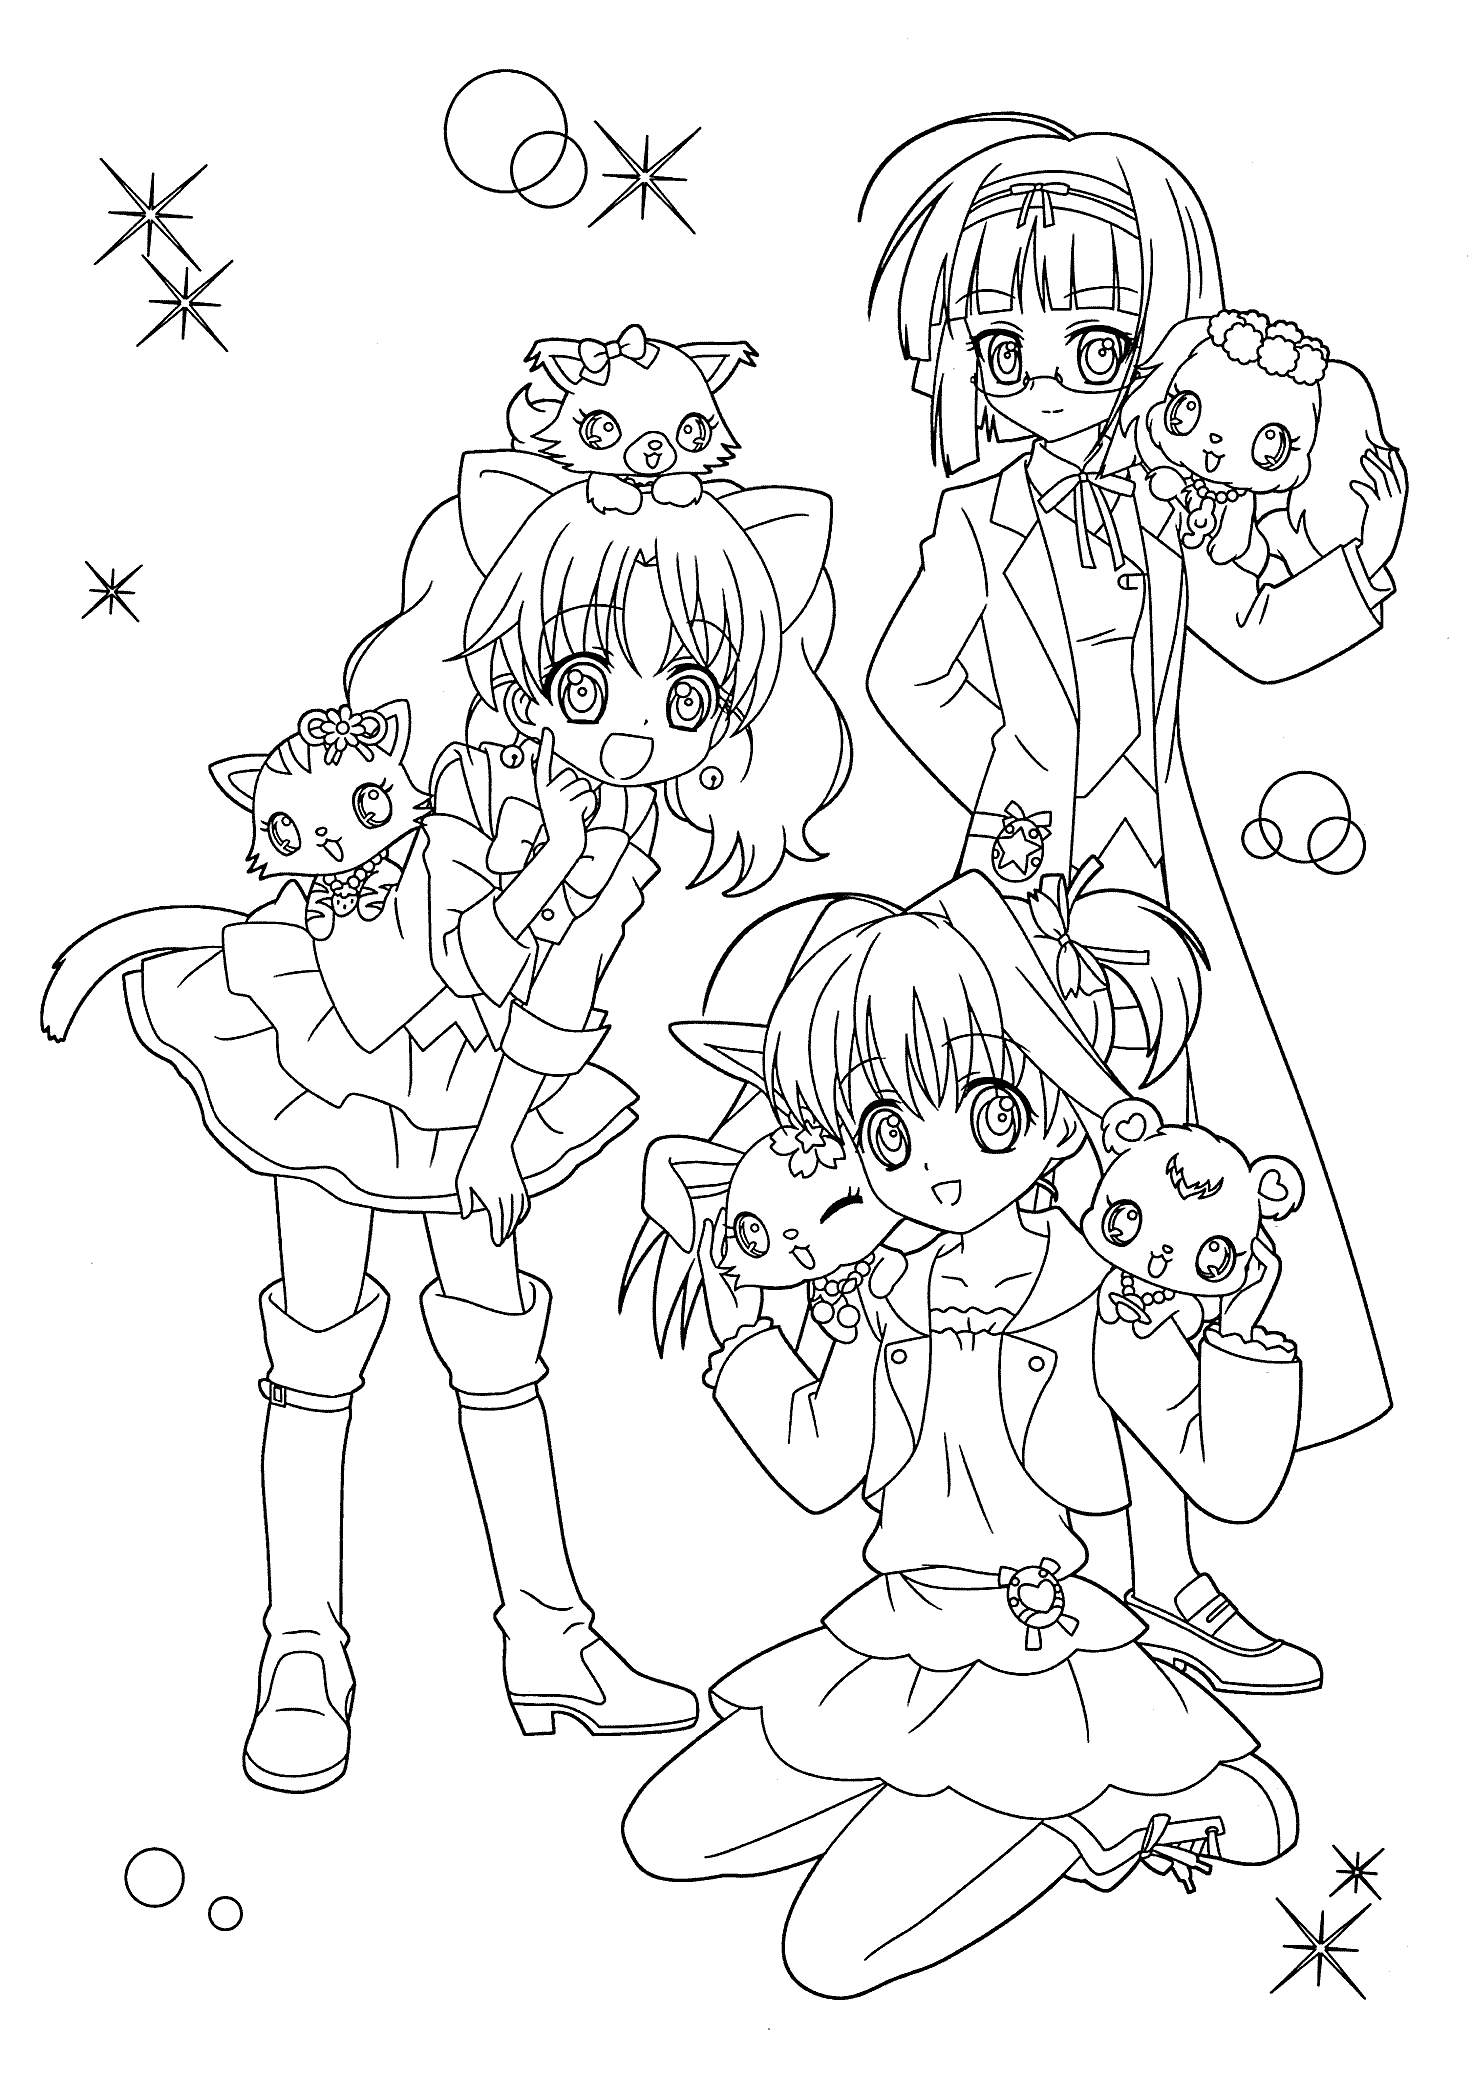 kawaii girls coloring pages pin on dez girls coloring pages kawaii 